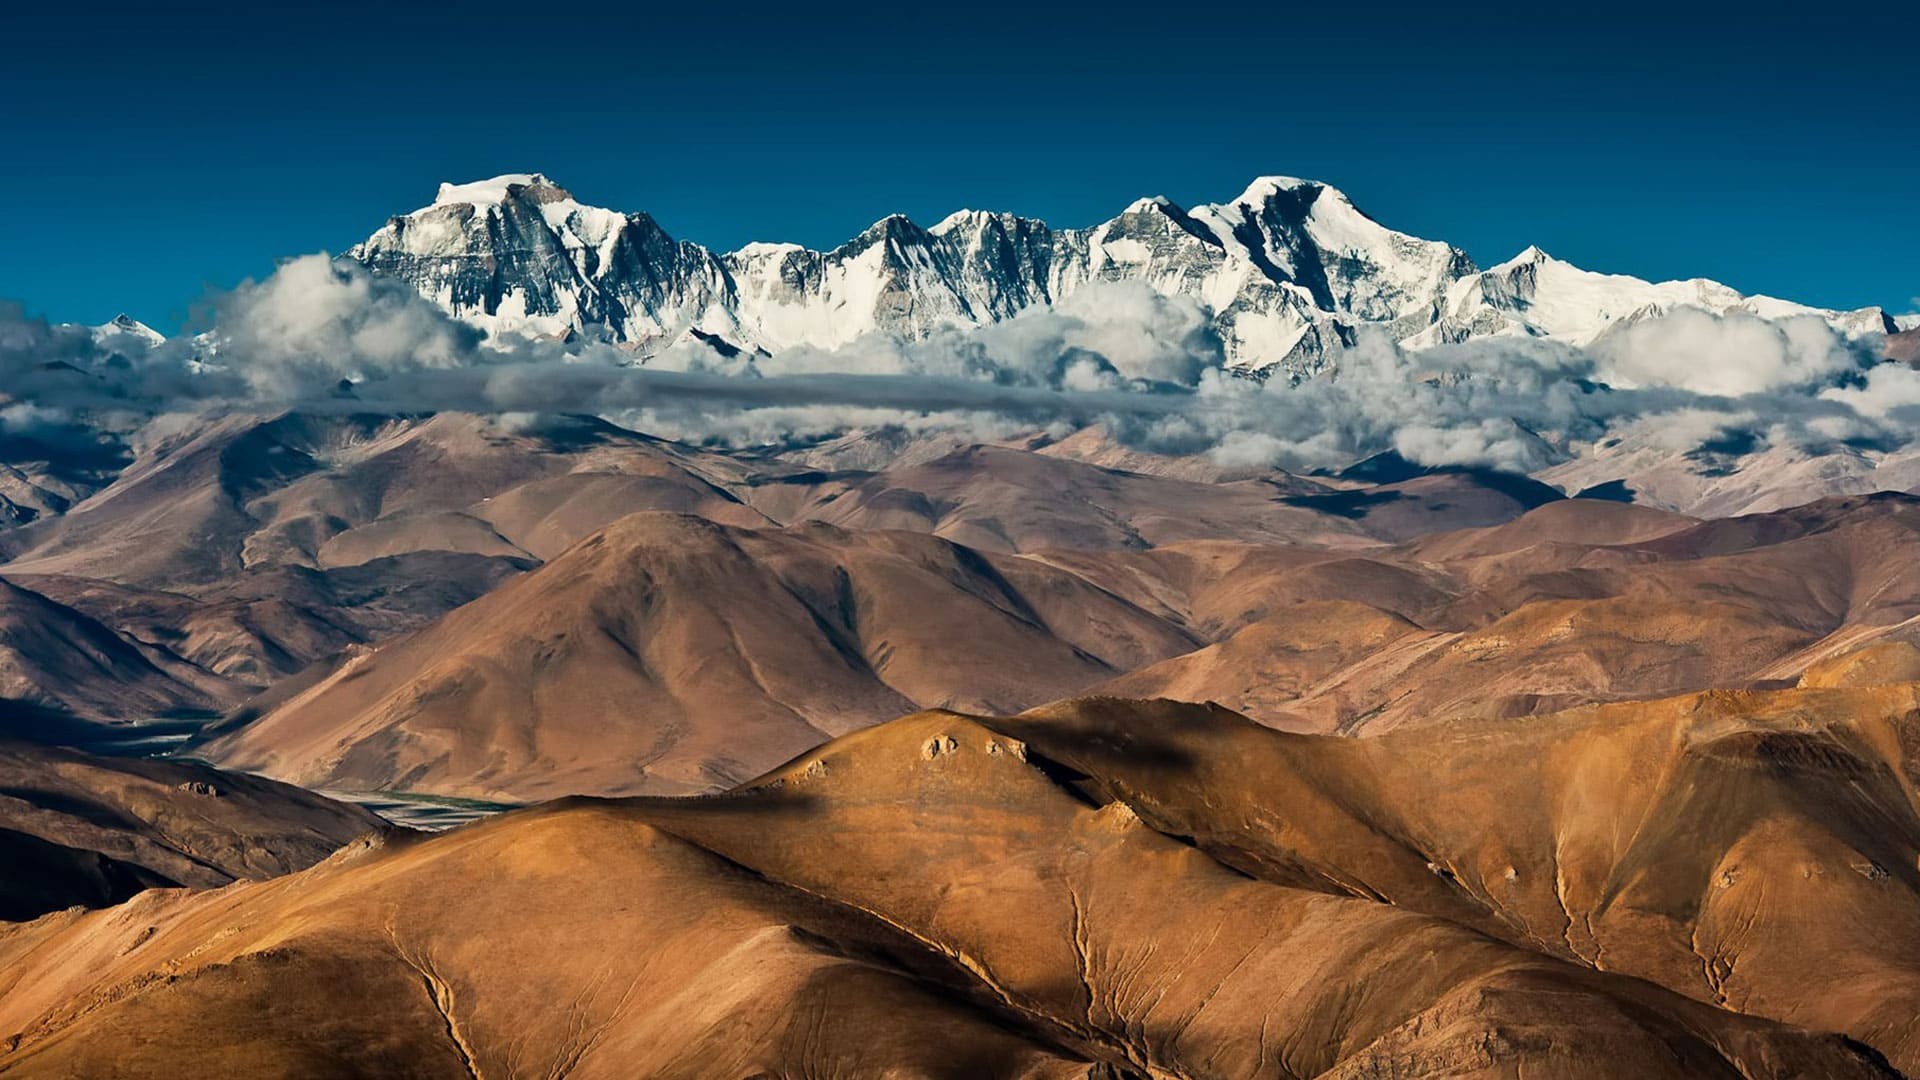 Ascent of Cho Oyu